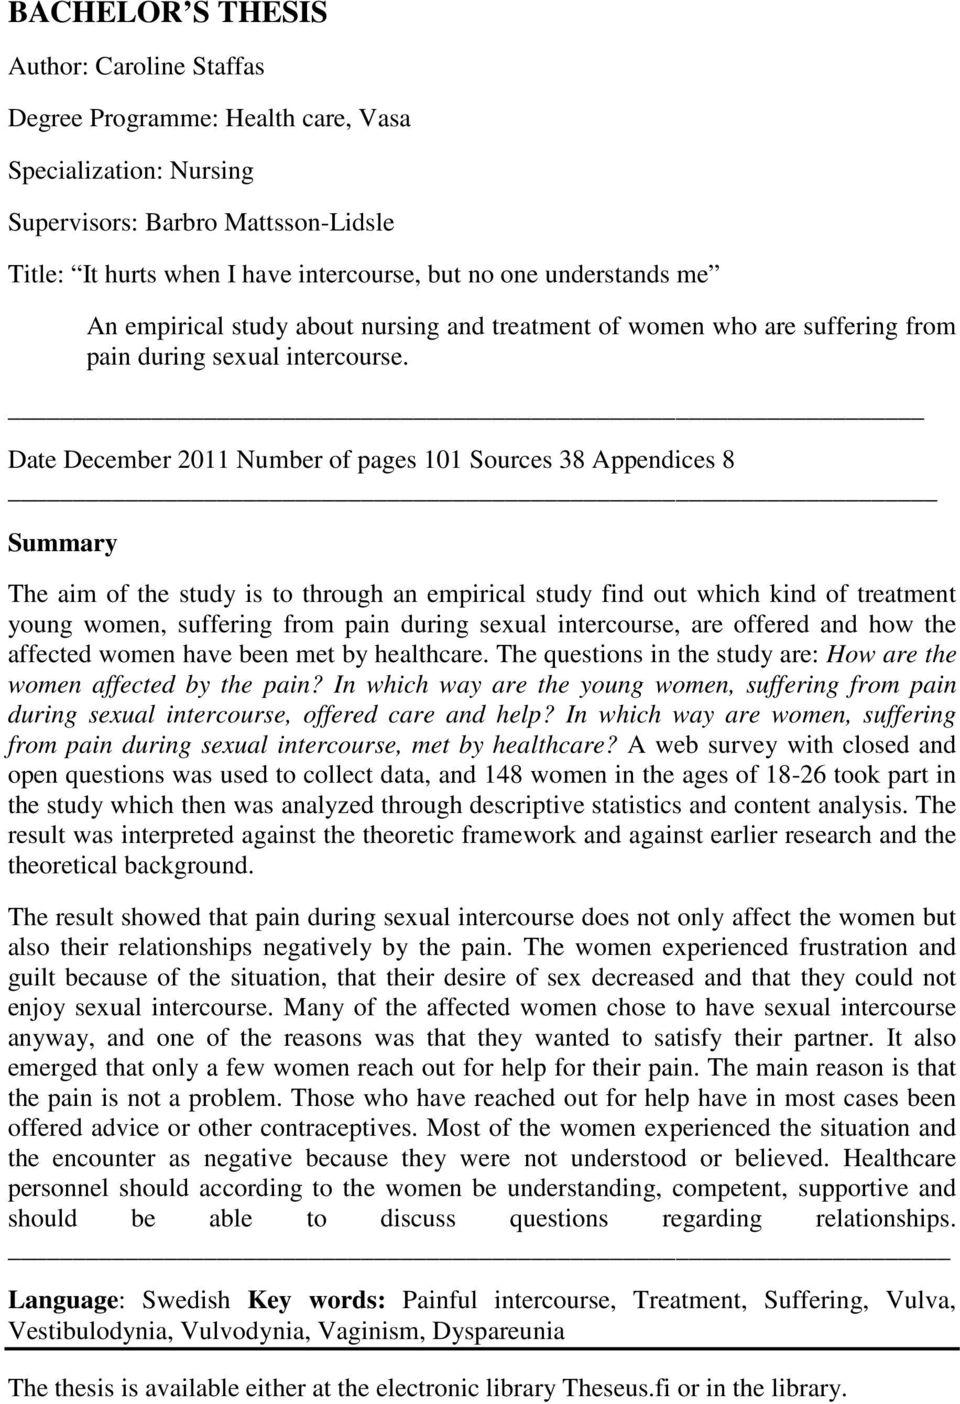 Date December 2011 Number of pages 101 Sources 38 Appendices 8 Summary The aim of the study is to through an empirical study find out which kind of treatment young women, suffering from pain during